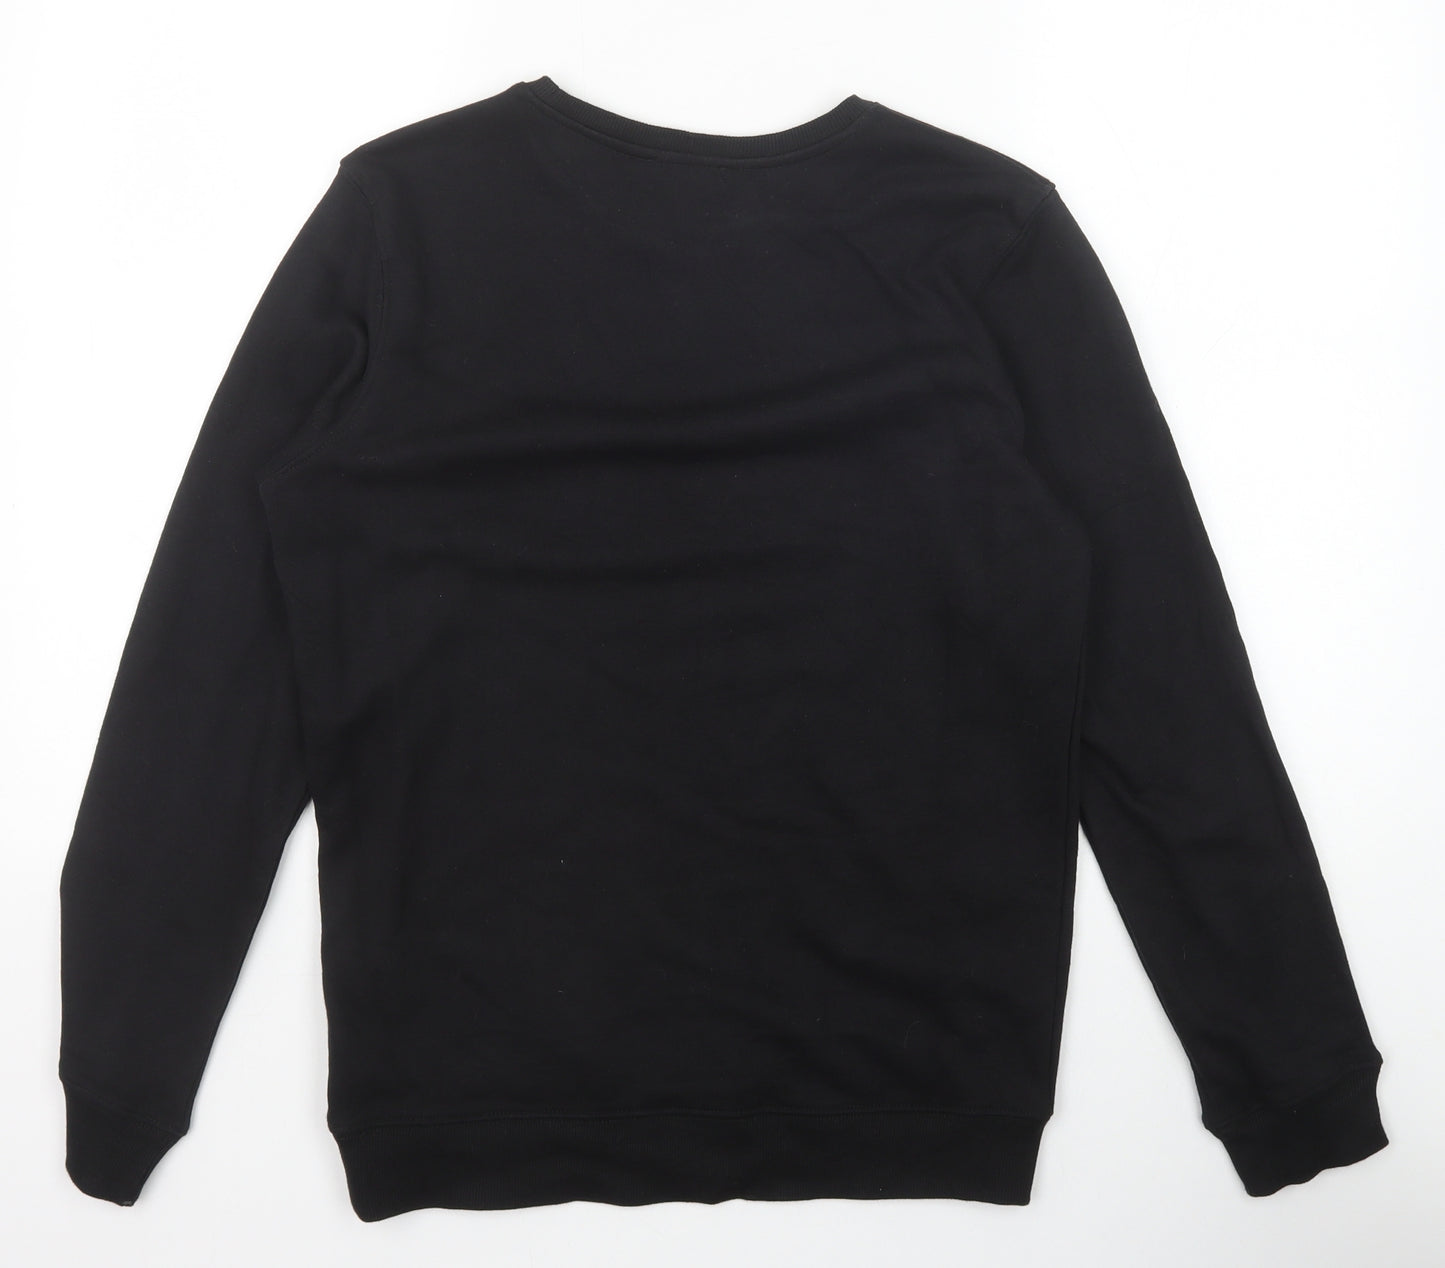 New Look Mens Black Cotton Pullover Sweatshirt Size S - NYC Light in Shade